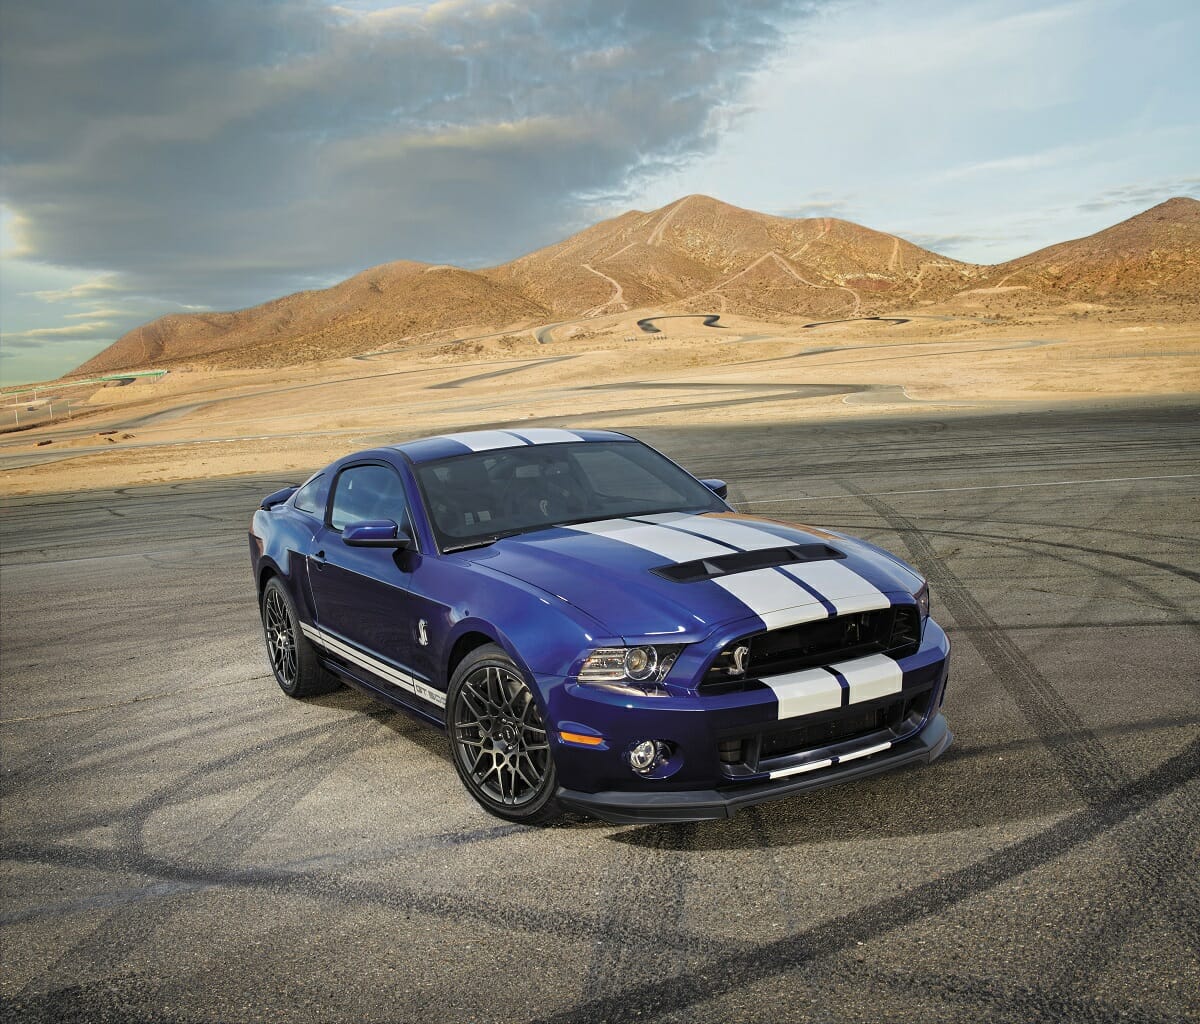 2014 Shelby GT500 - Photo by Ford